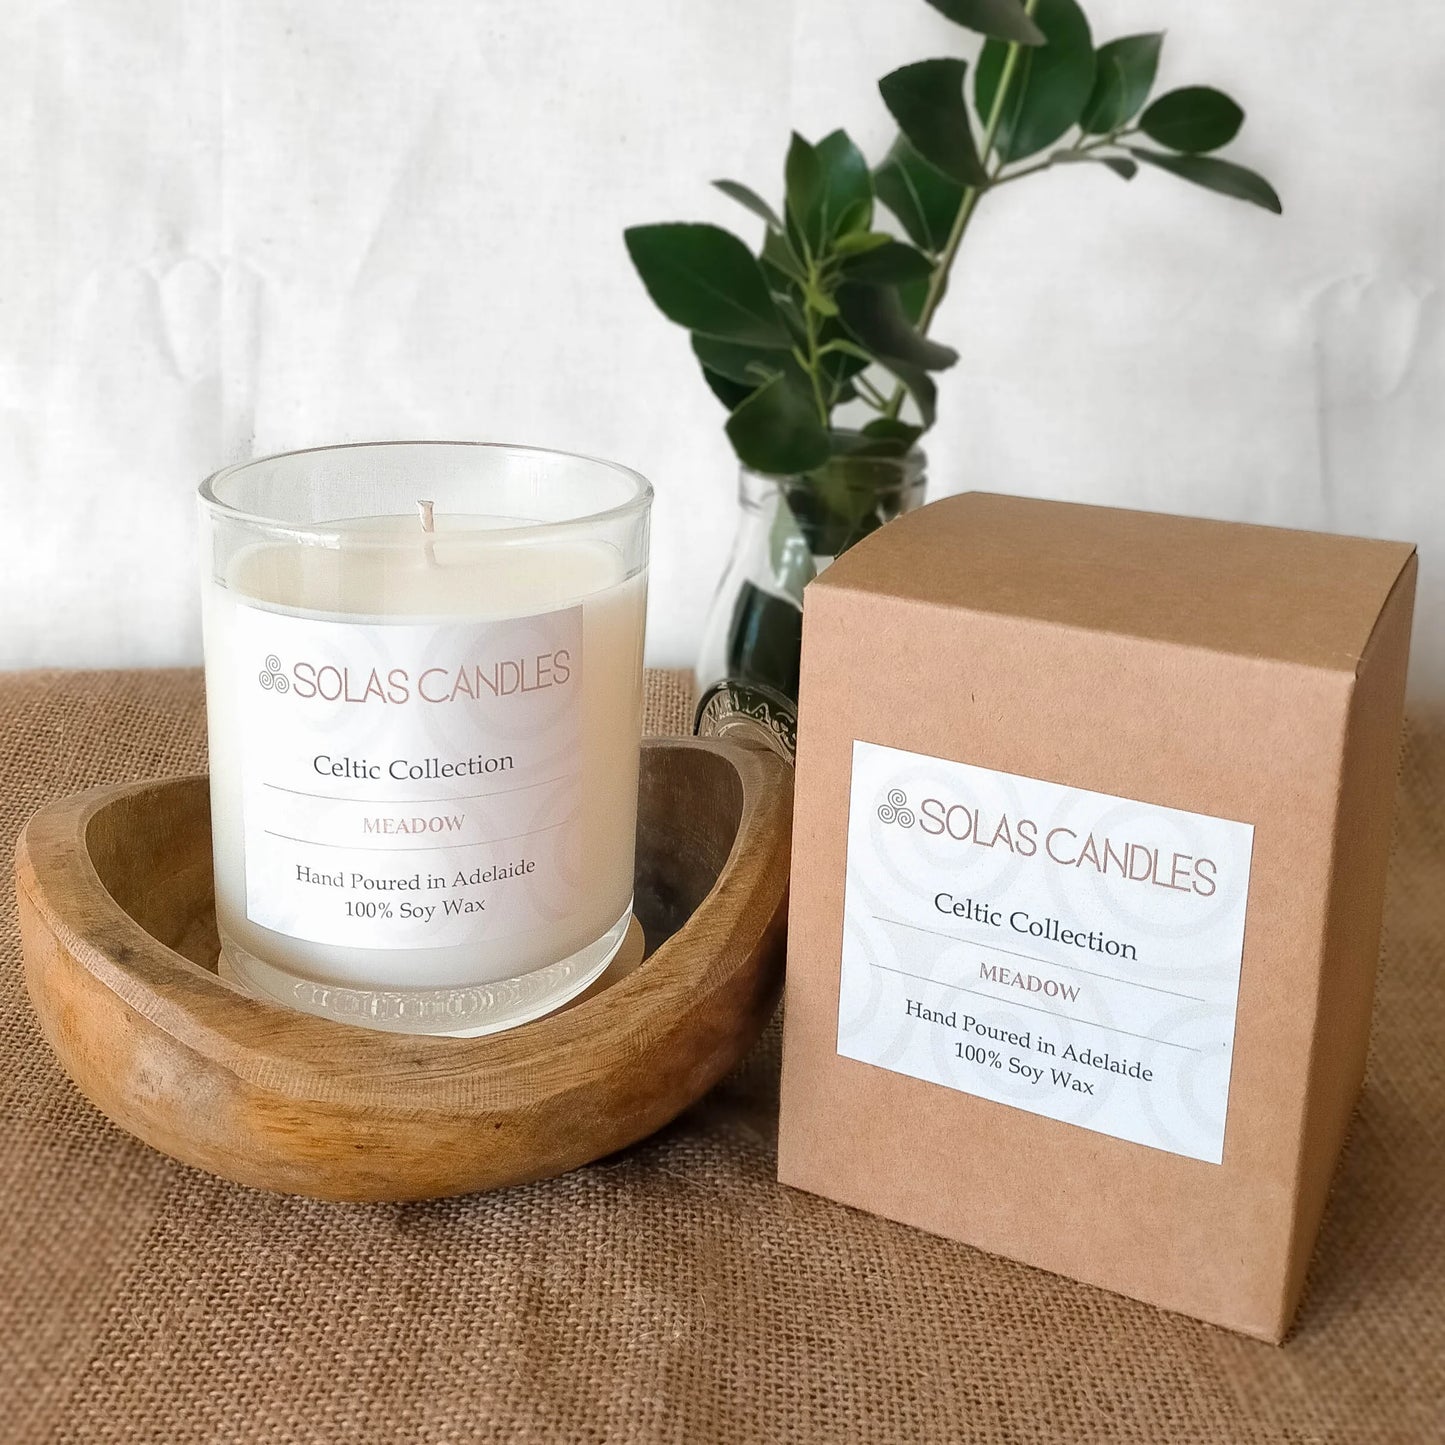 Solas Candles - Celtic Collection, Meadow